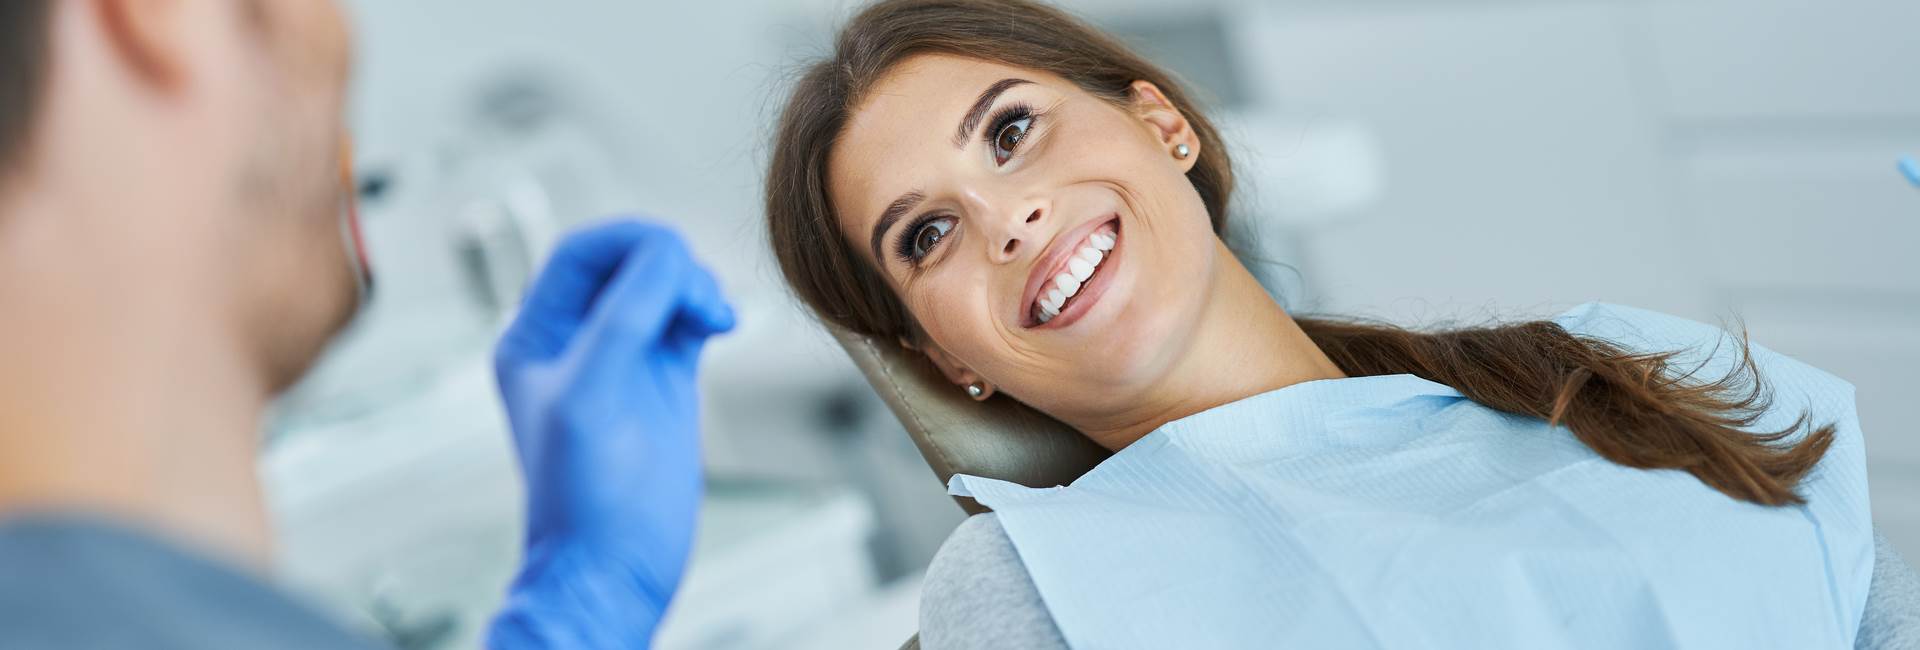 Beautiful woman smiling after Root Canals